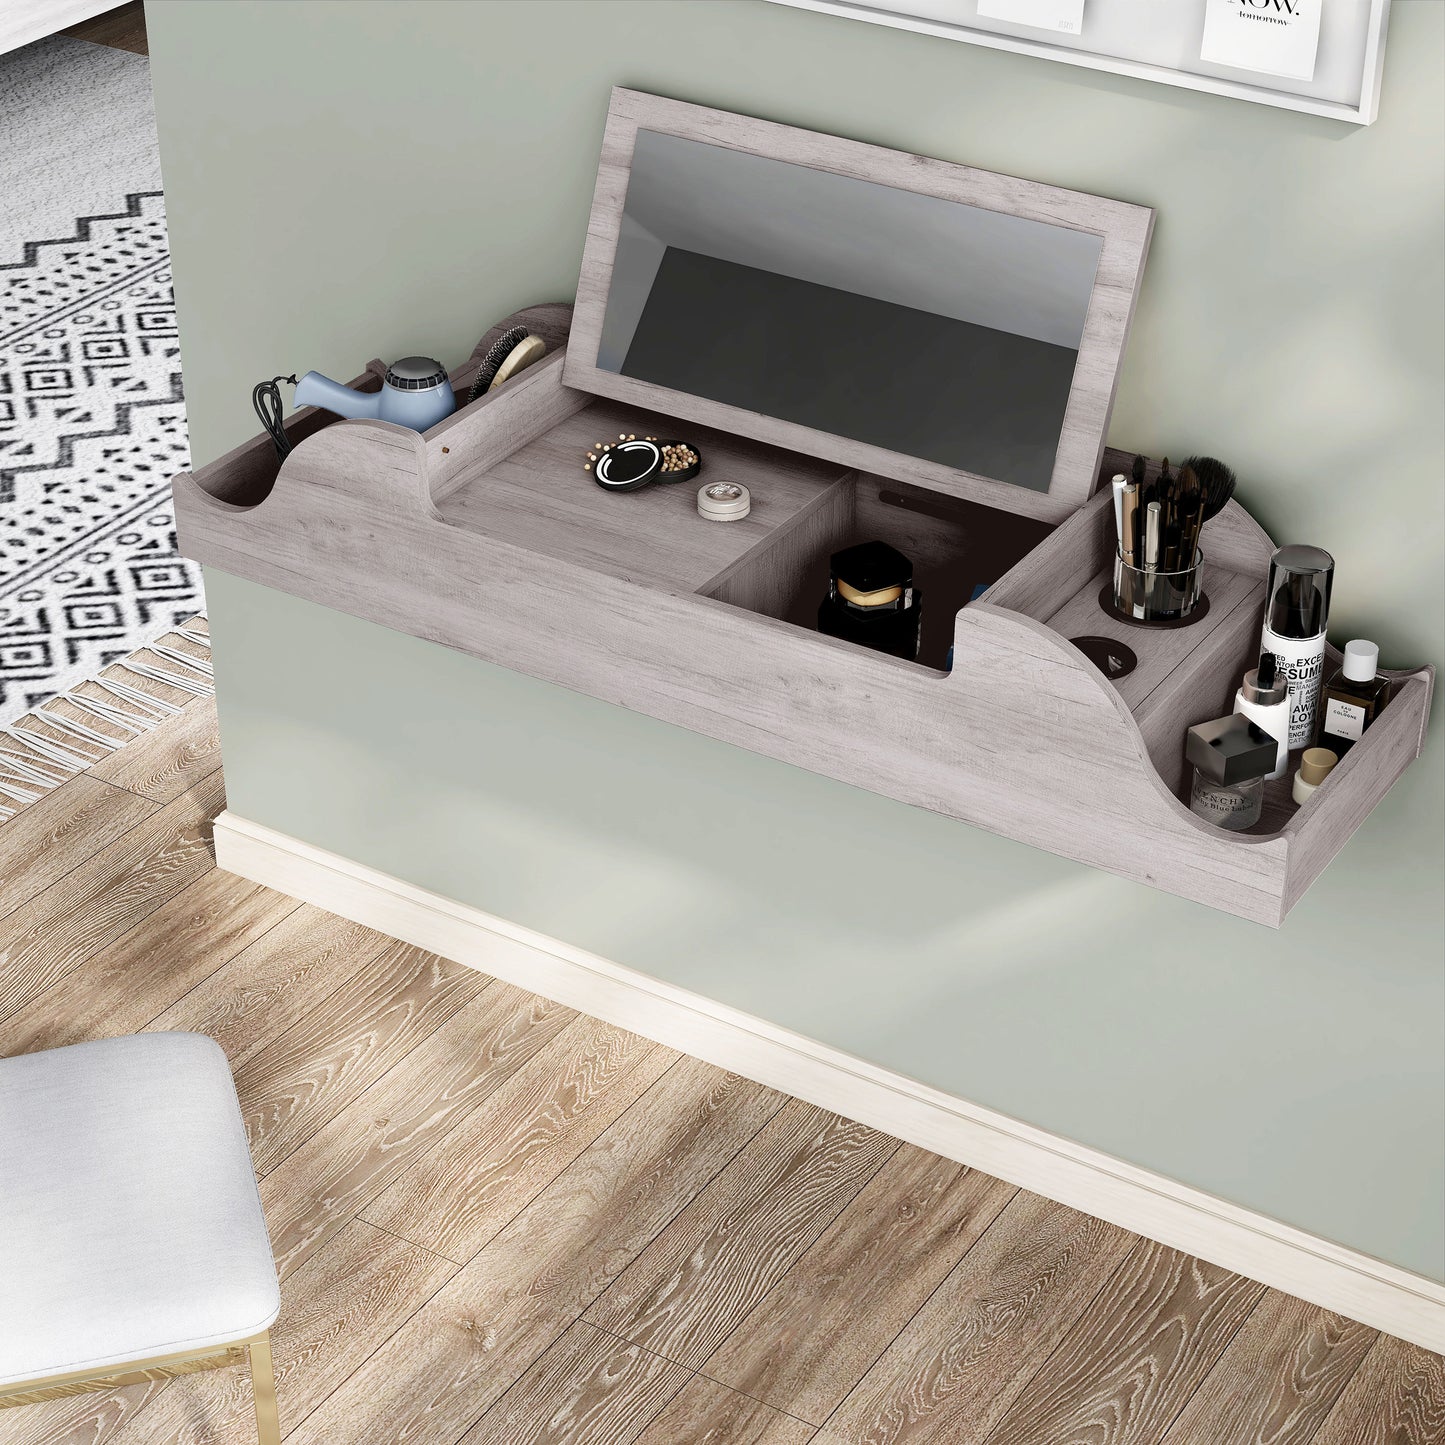 Left angled bird's eye view of a contemporary coastal white flip-top wall mounted makeup vanity with hidden storage and top up in a bedroom with accessories